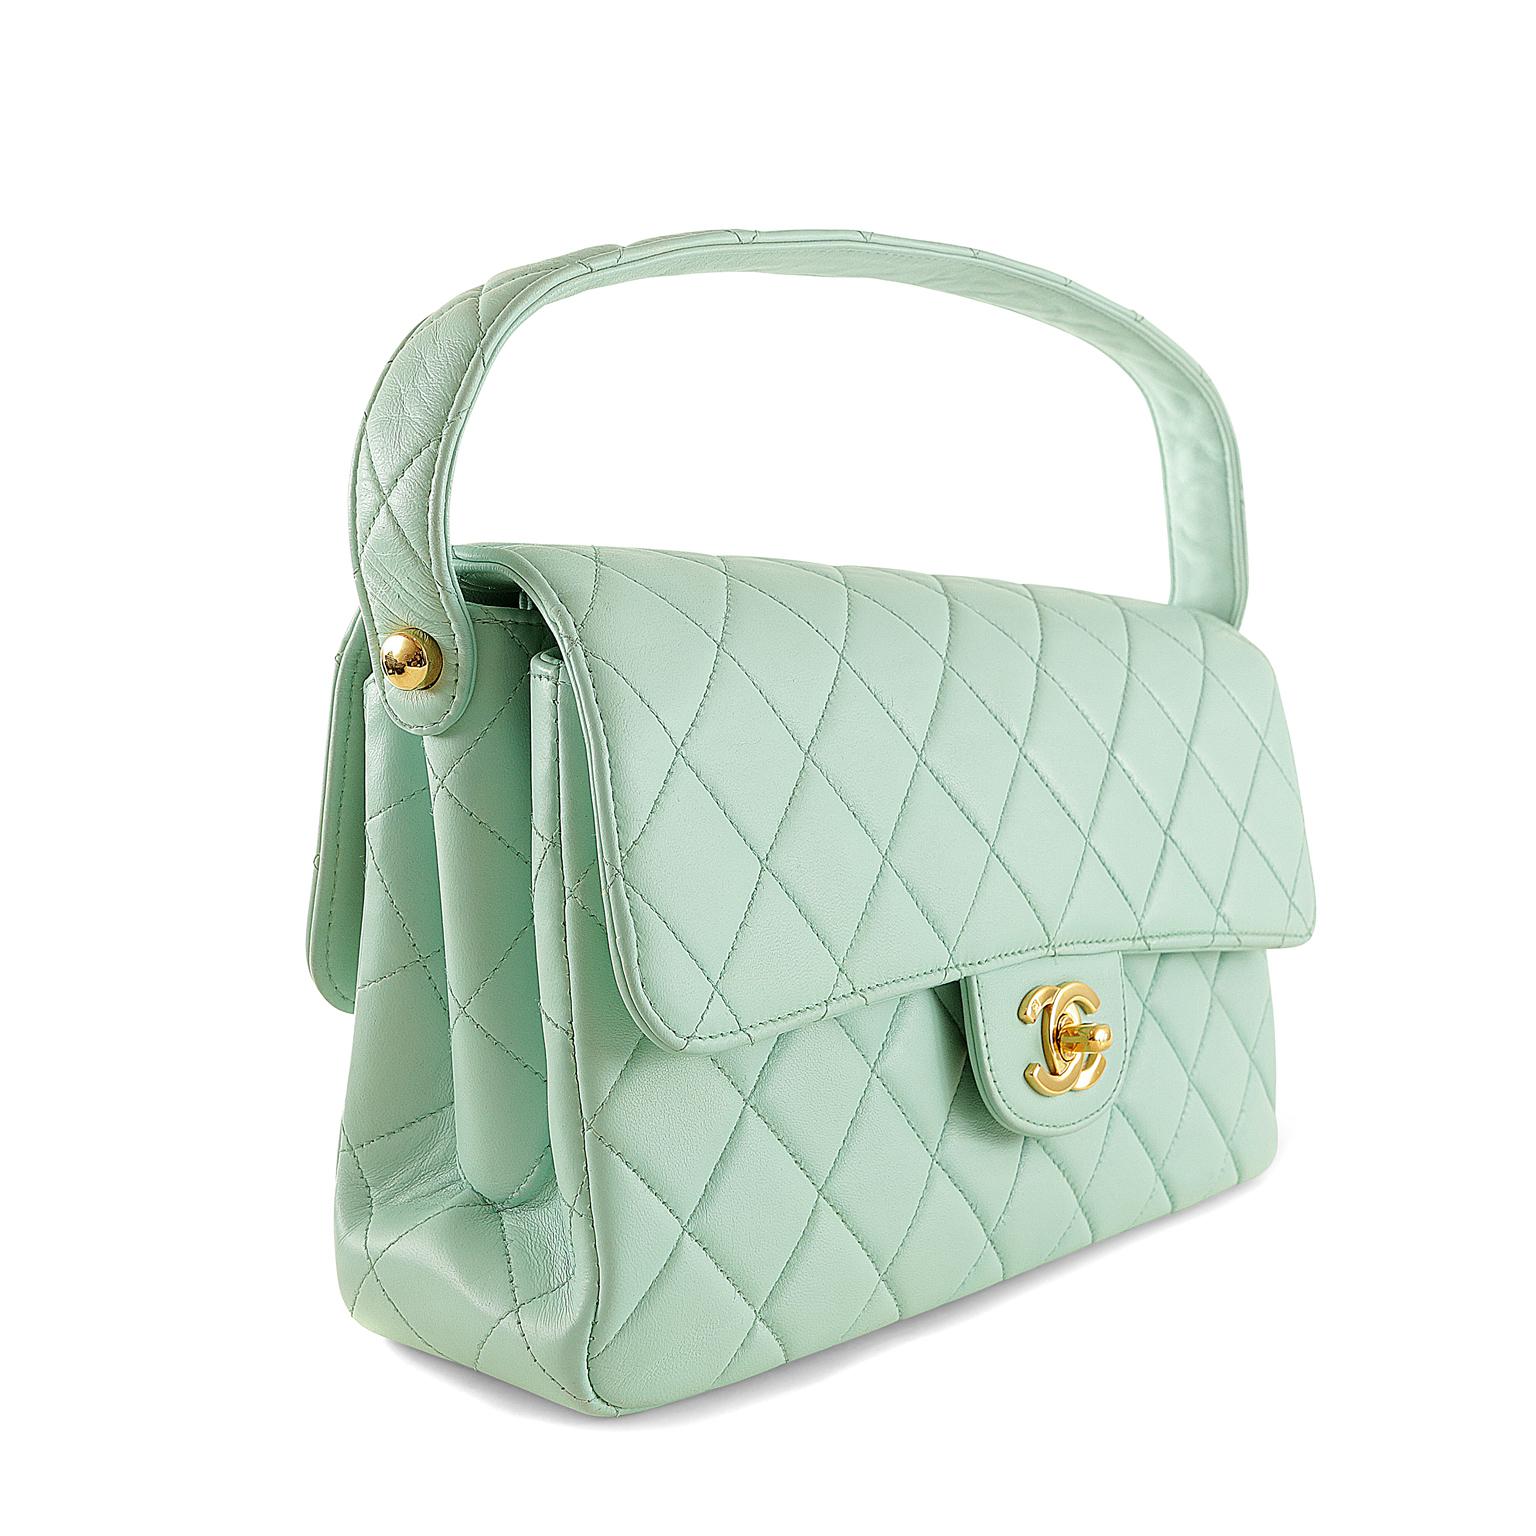 Chanel Mint Leather Double Sided Classic Bag- excellent plus condition
From the mid 1990’s, this piece is very rare due to its unique color and double-sided nature.  
Pastel mint green leather is quilted in signature Chanel diamond pattern. Each